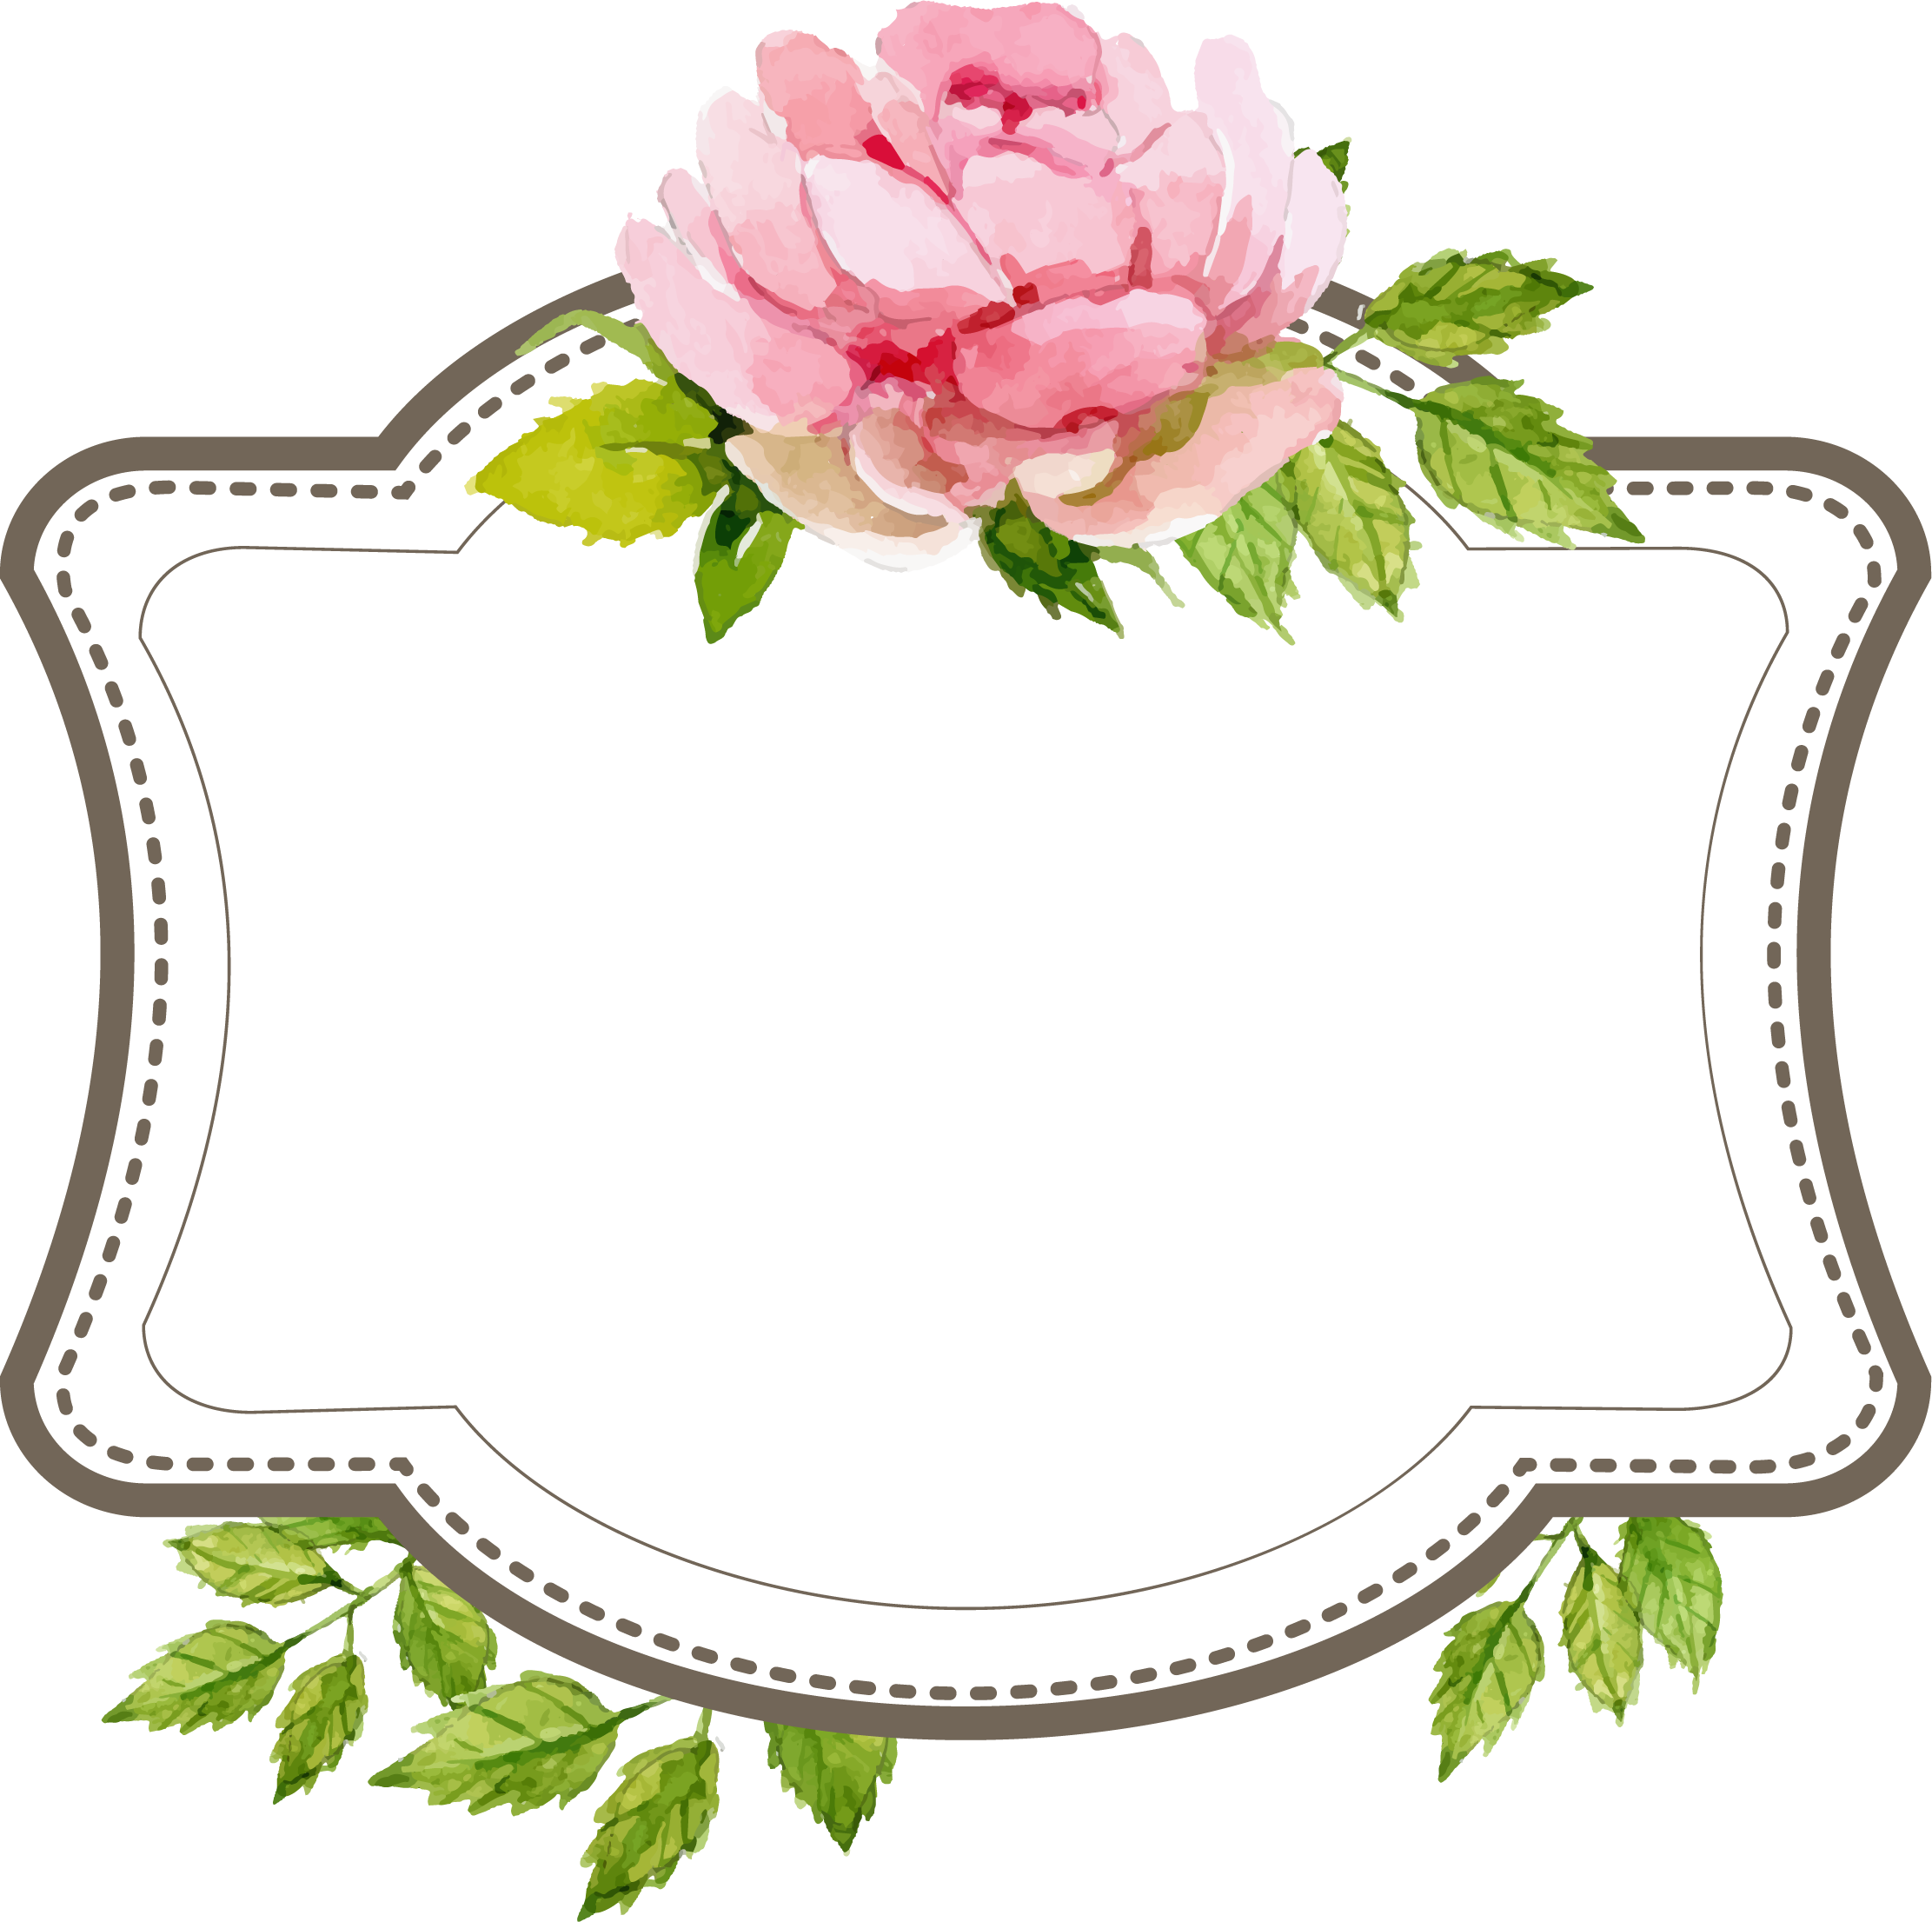 Download Clipart Icon - Beautiful Text Engagement Label Wedding Border.